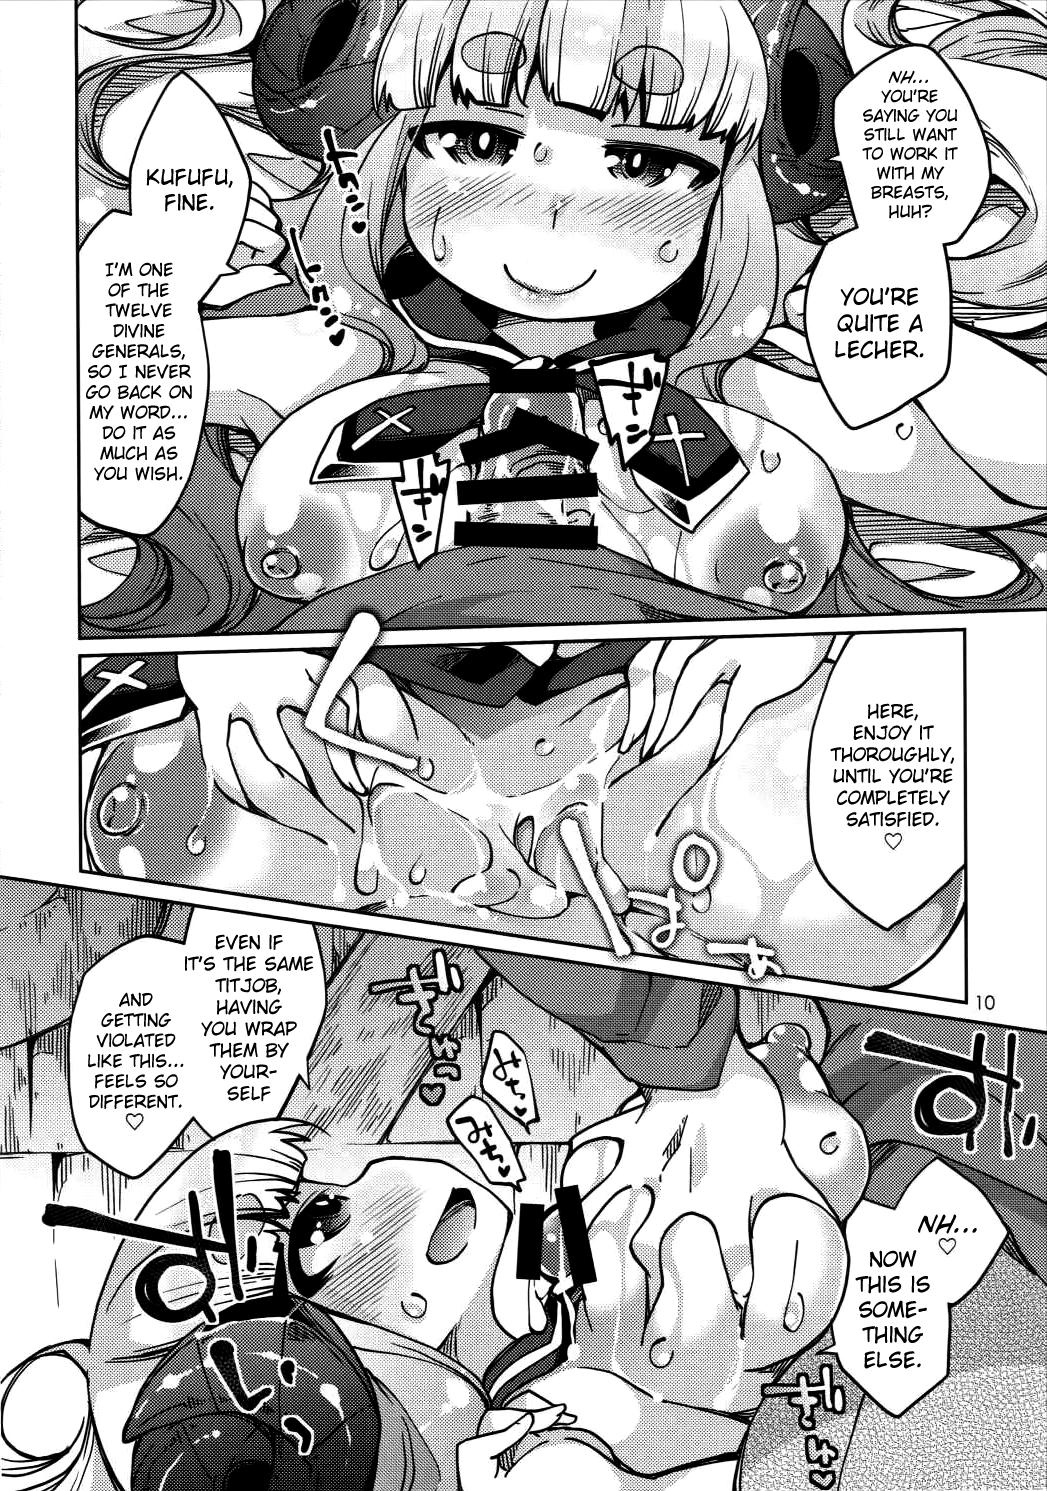 Flogging Sheep God and Naughty Captain - Granblue fantasy Colombiana - Page 9